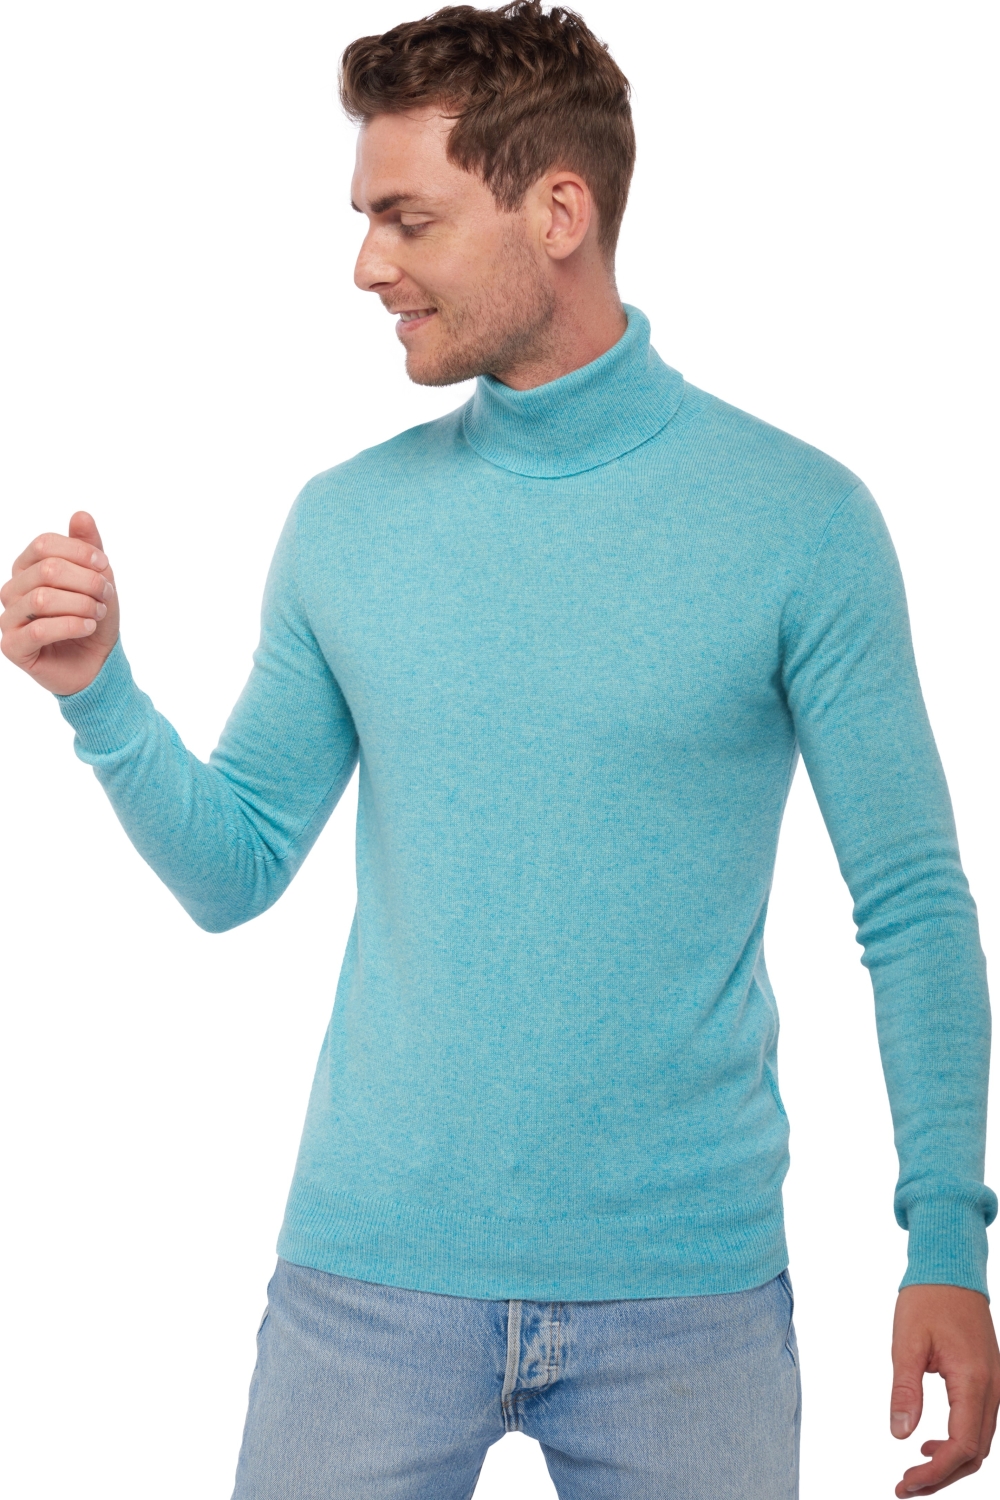 Cashmere men basic sweaters at low prices tarry first piscine xl